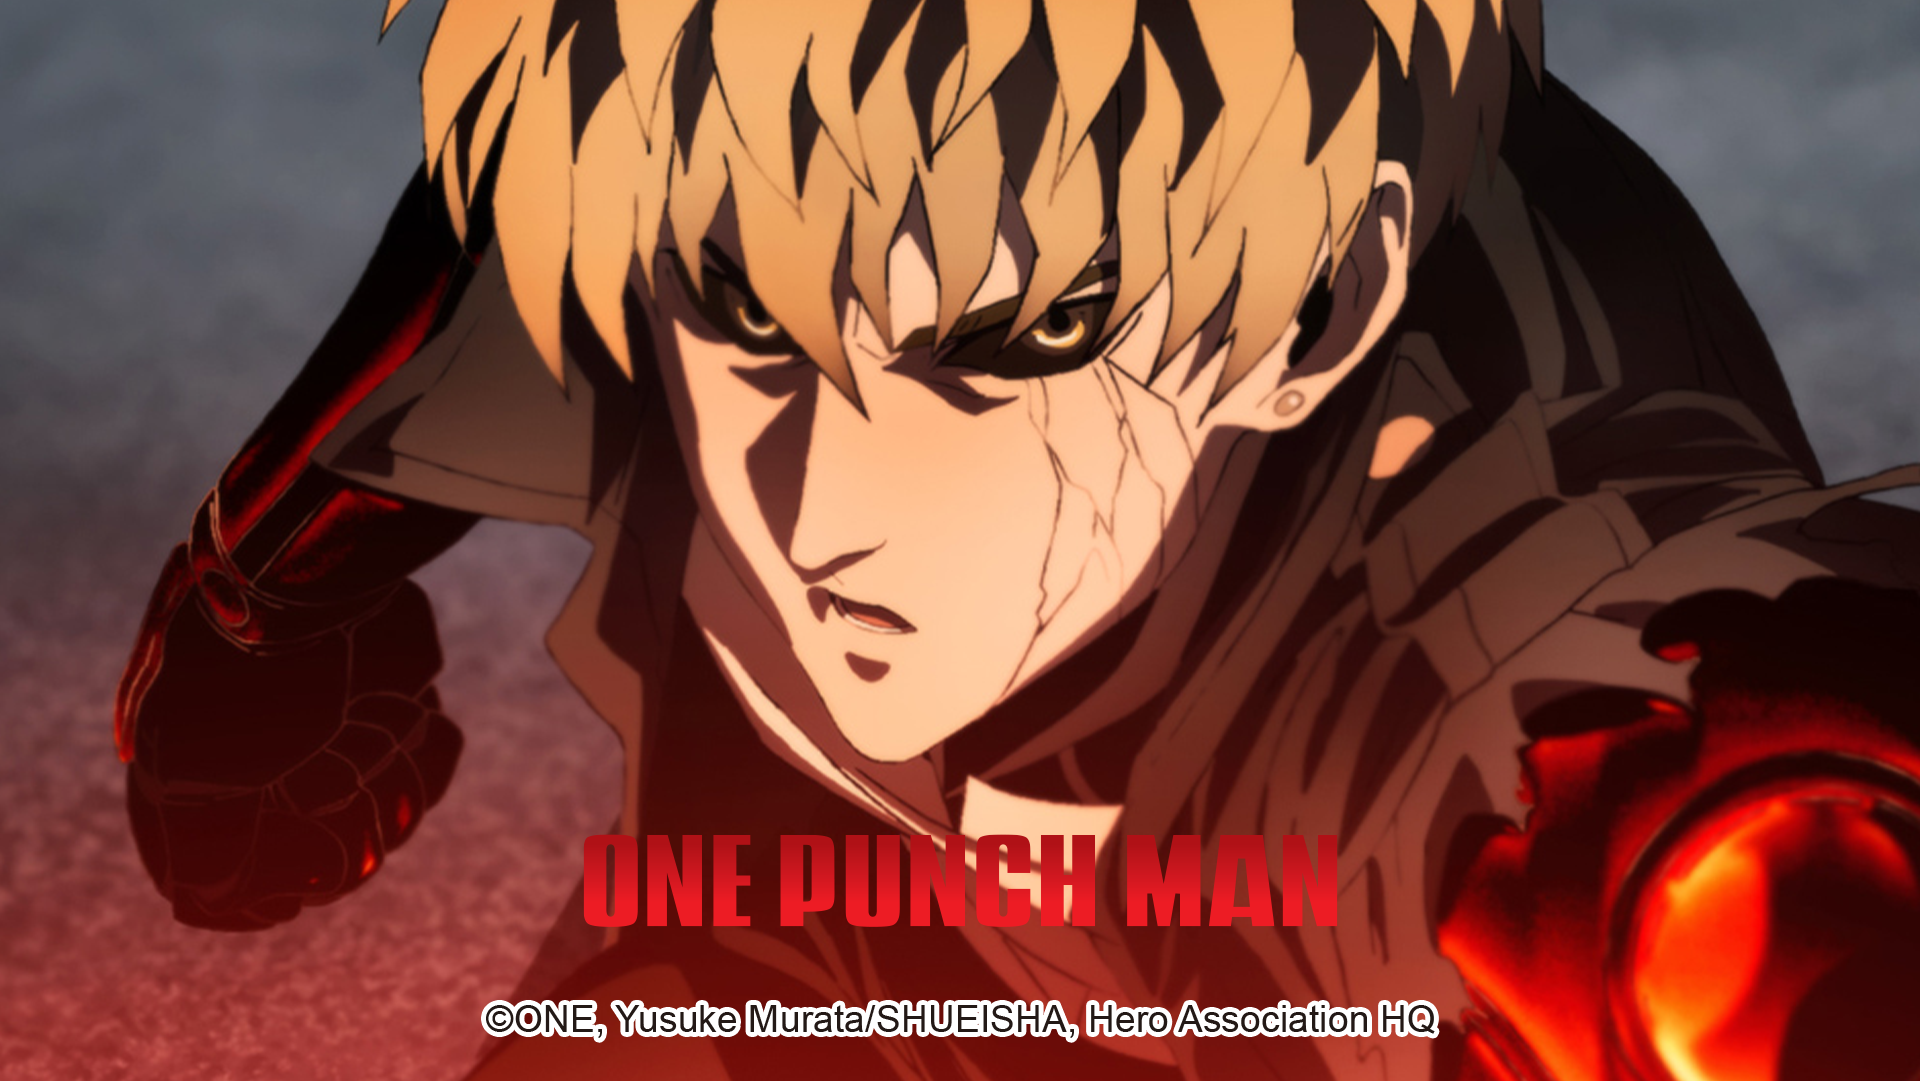 Indo episode 17 sub punch one man One Punch